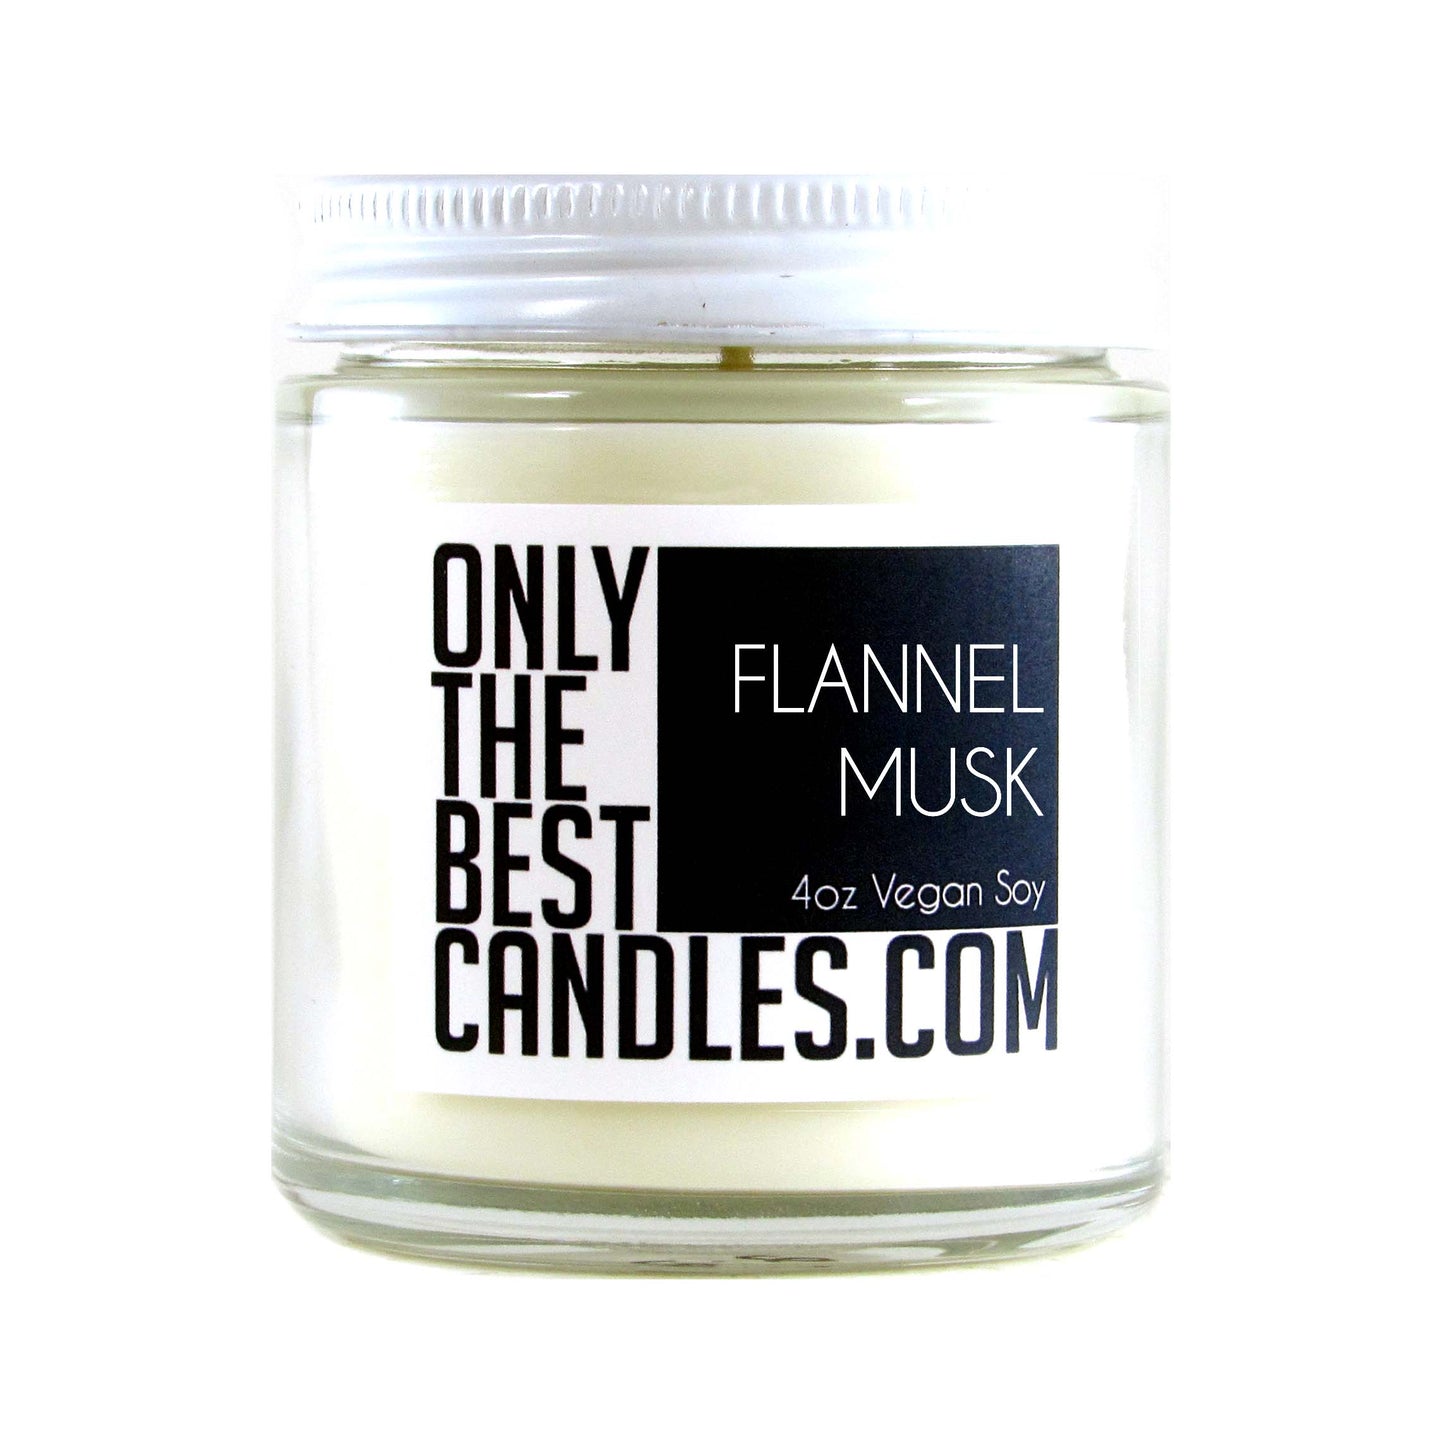 Flannel and Musk 4oz Candle